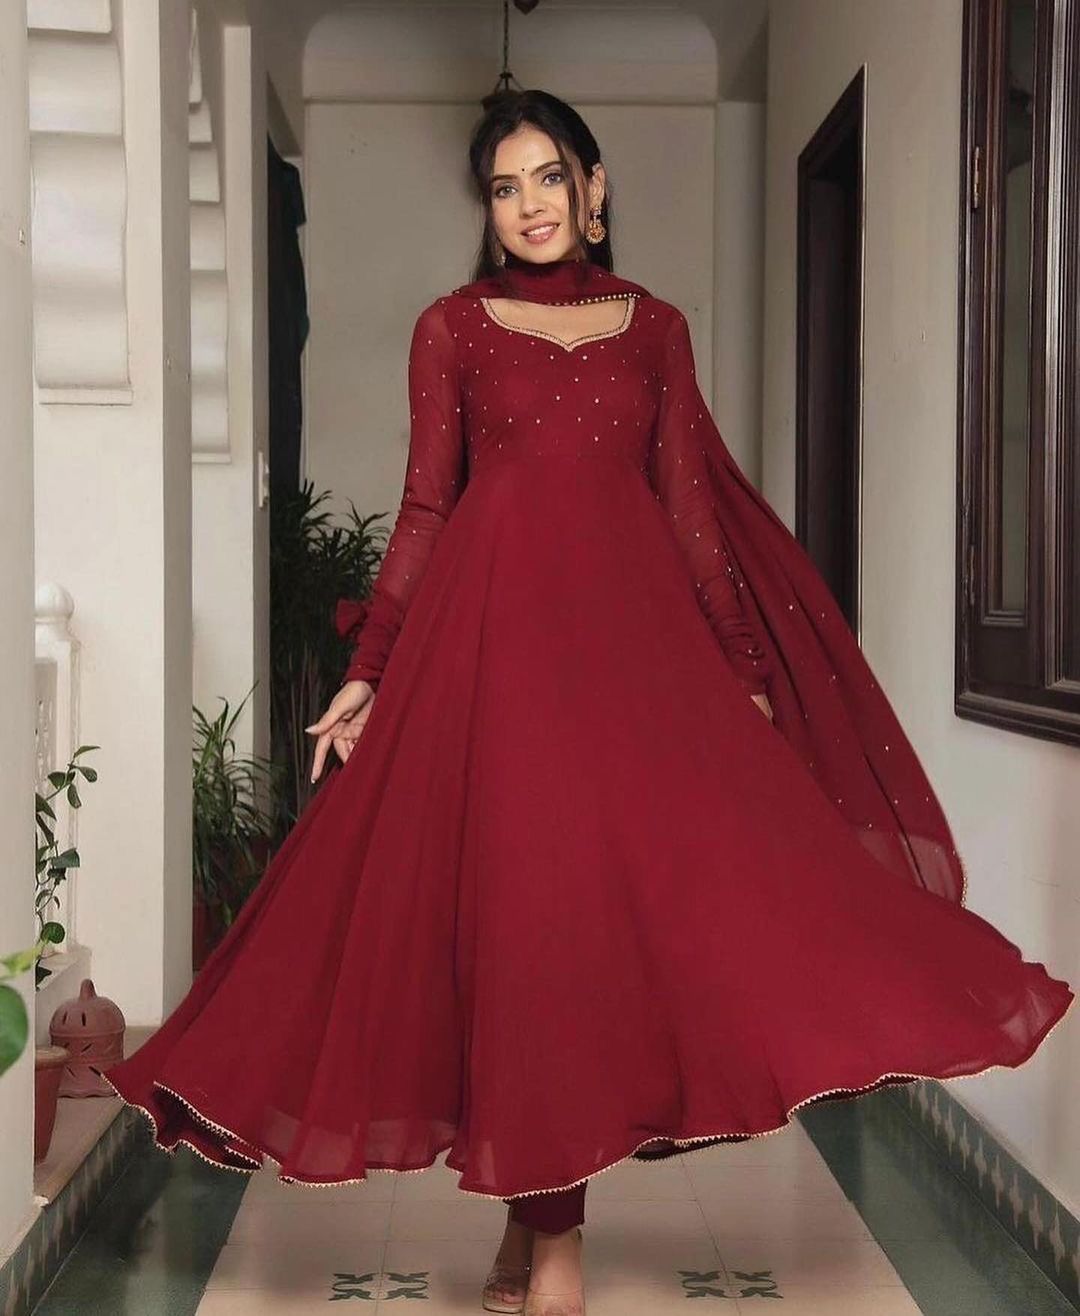 Haseen Gown